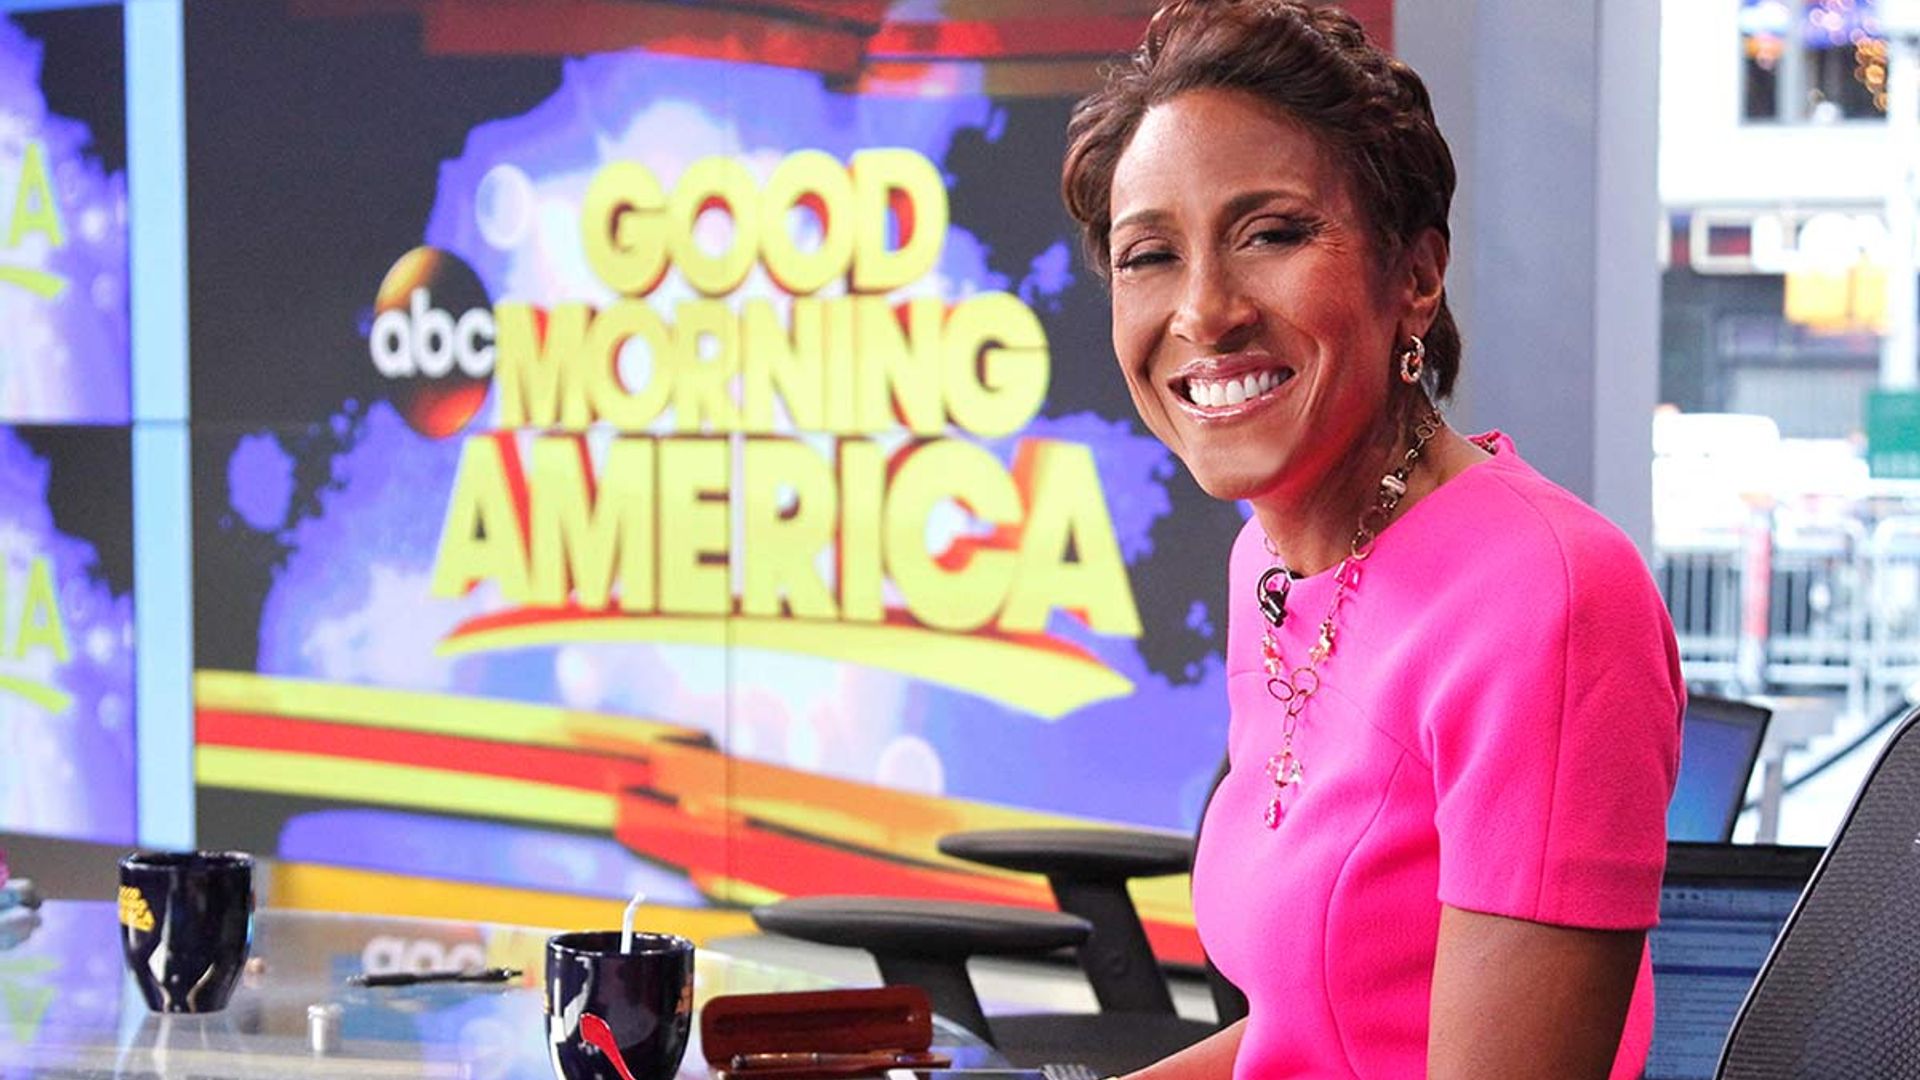 Robin Roberts steps away from GMA studios for exciting new adventure